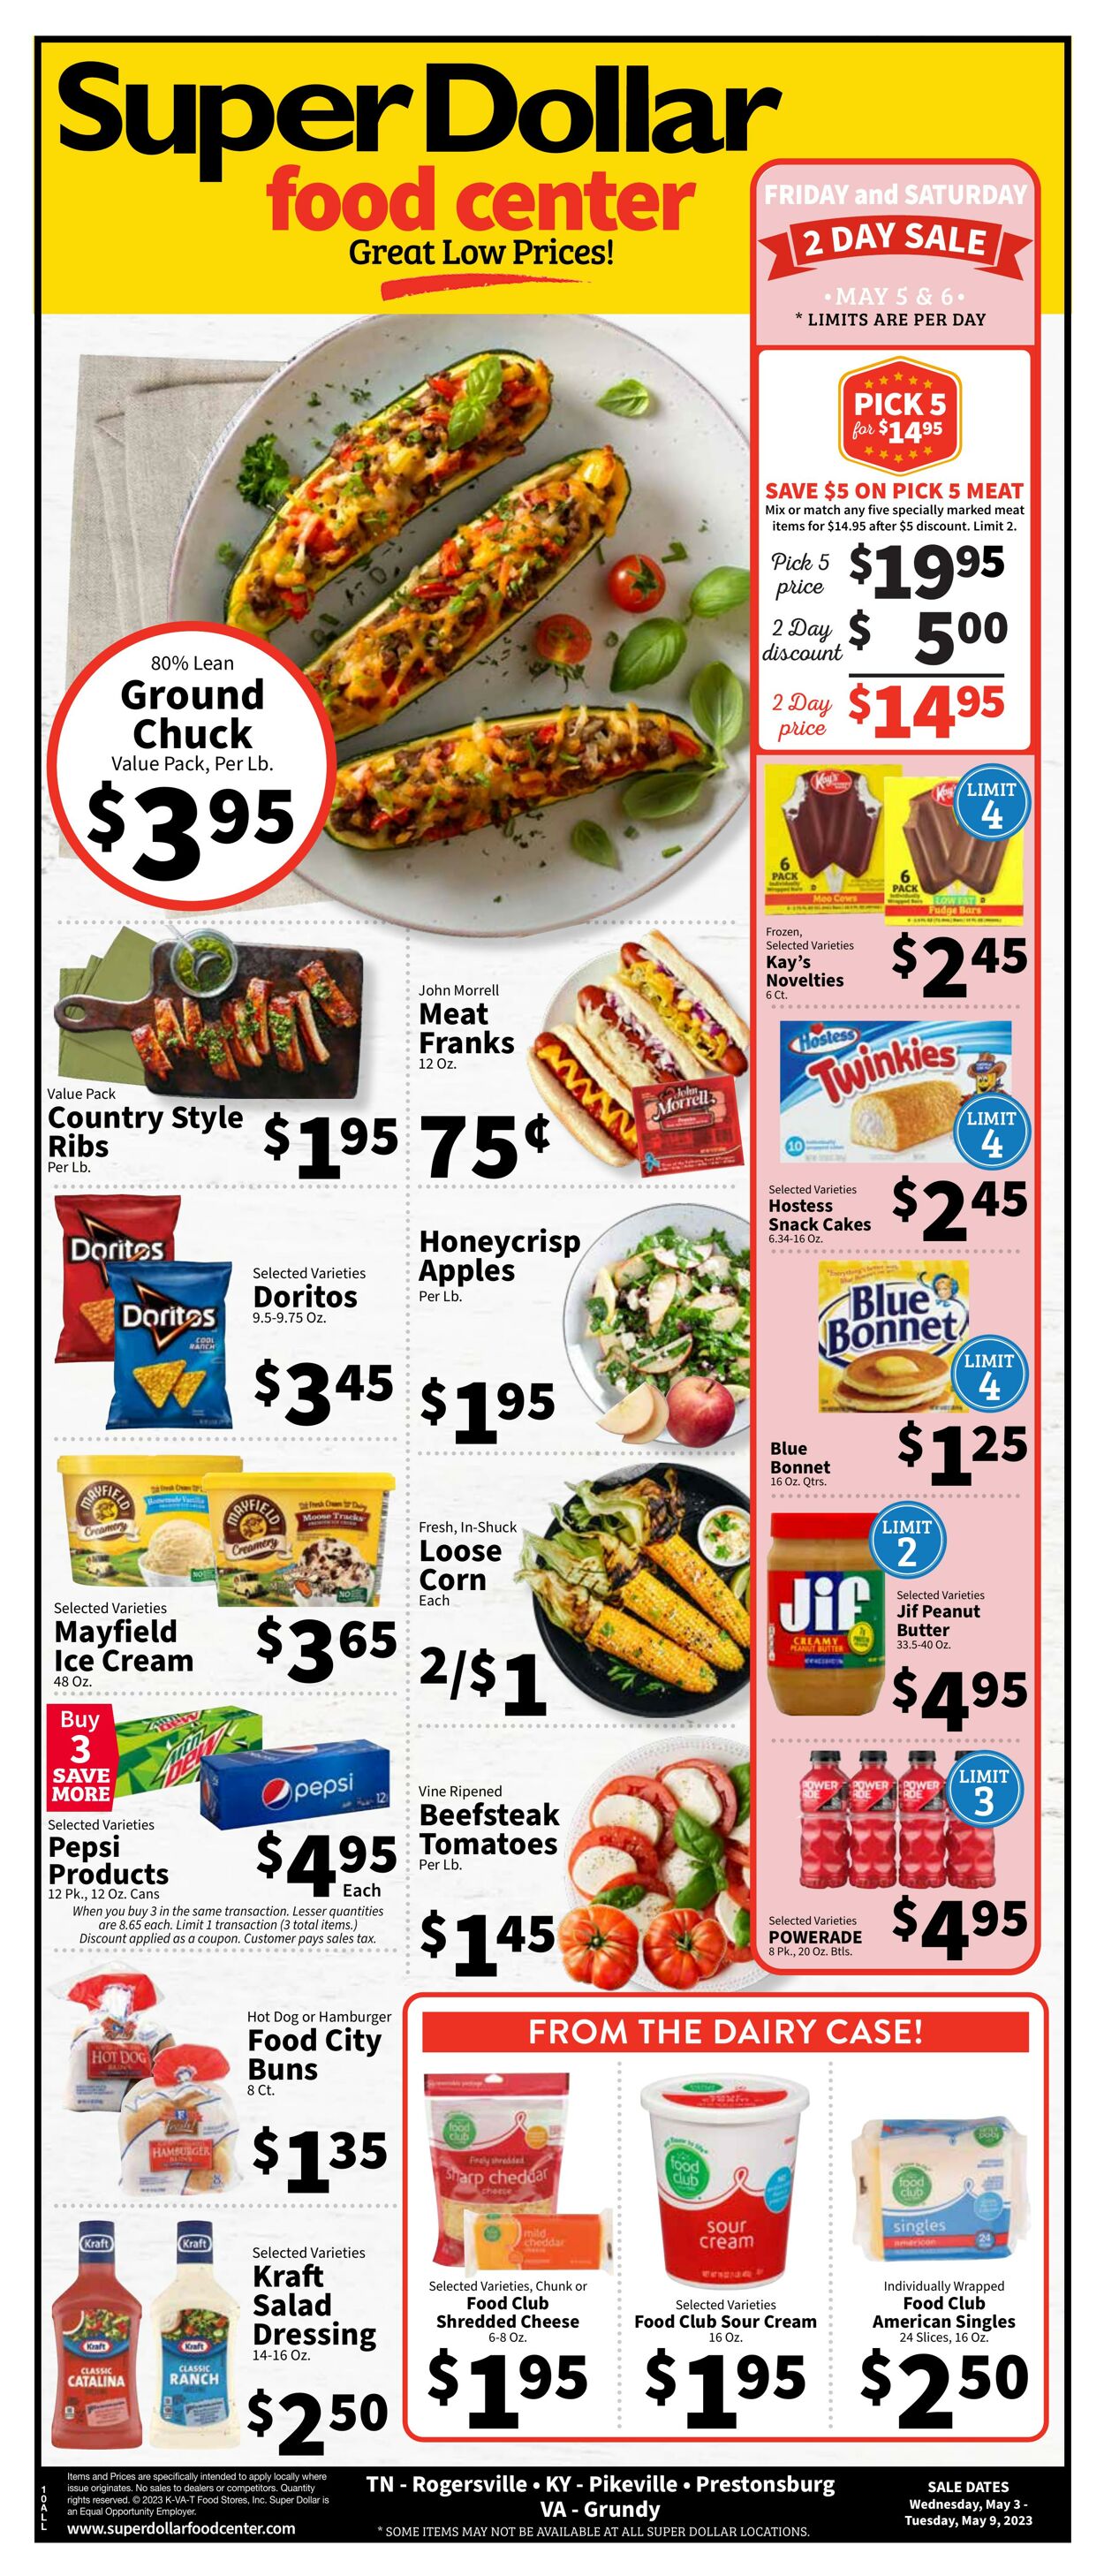 Super Dollar Stores Promotional weekly ads